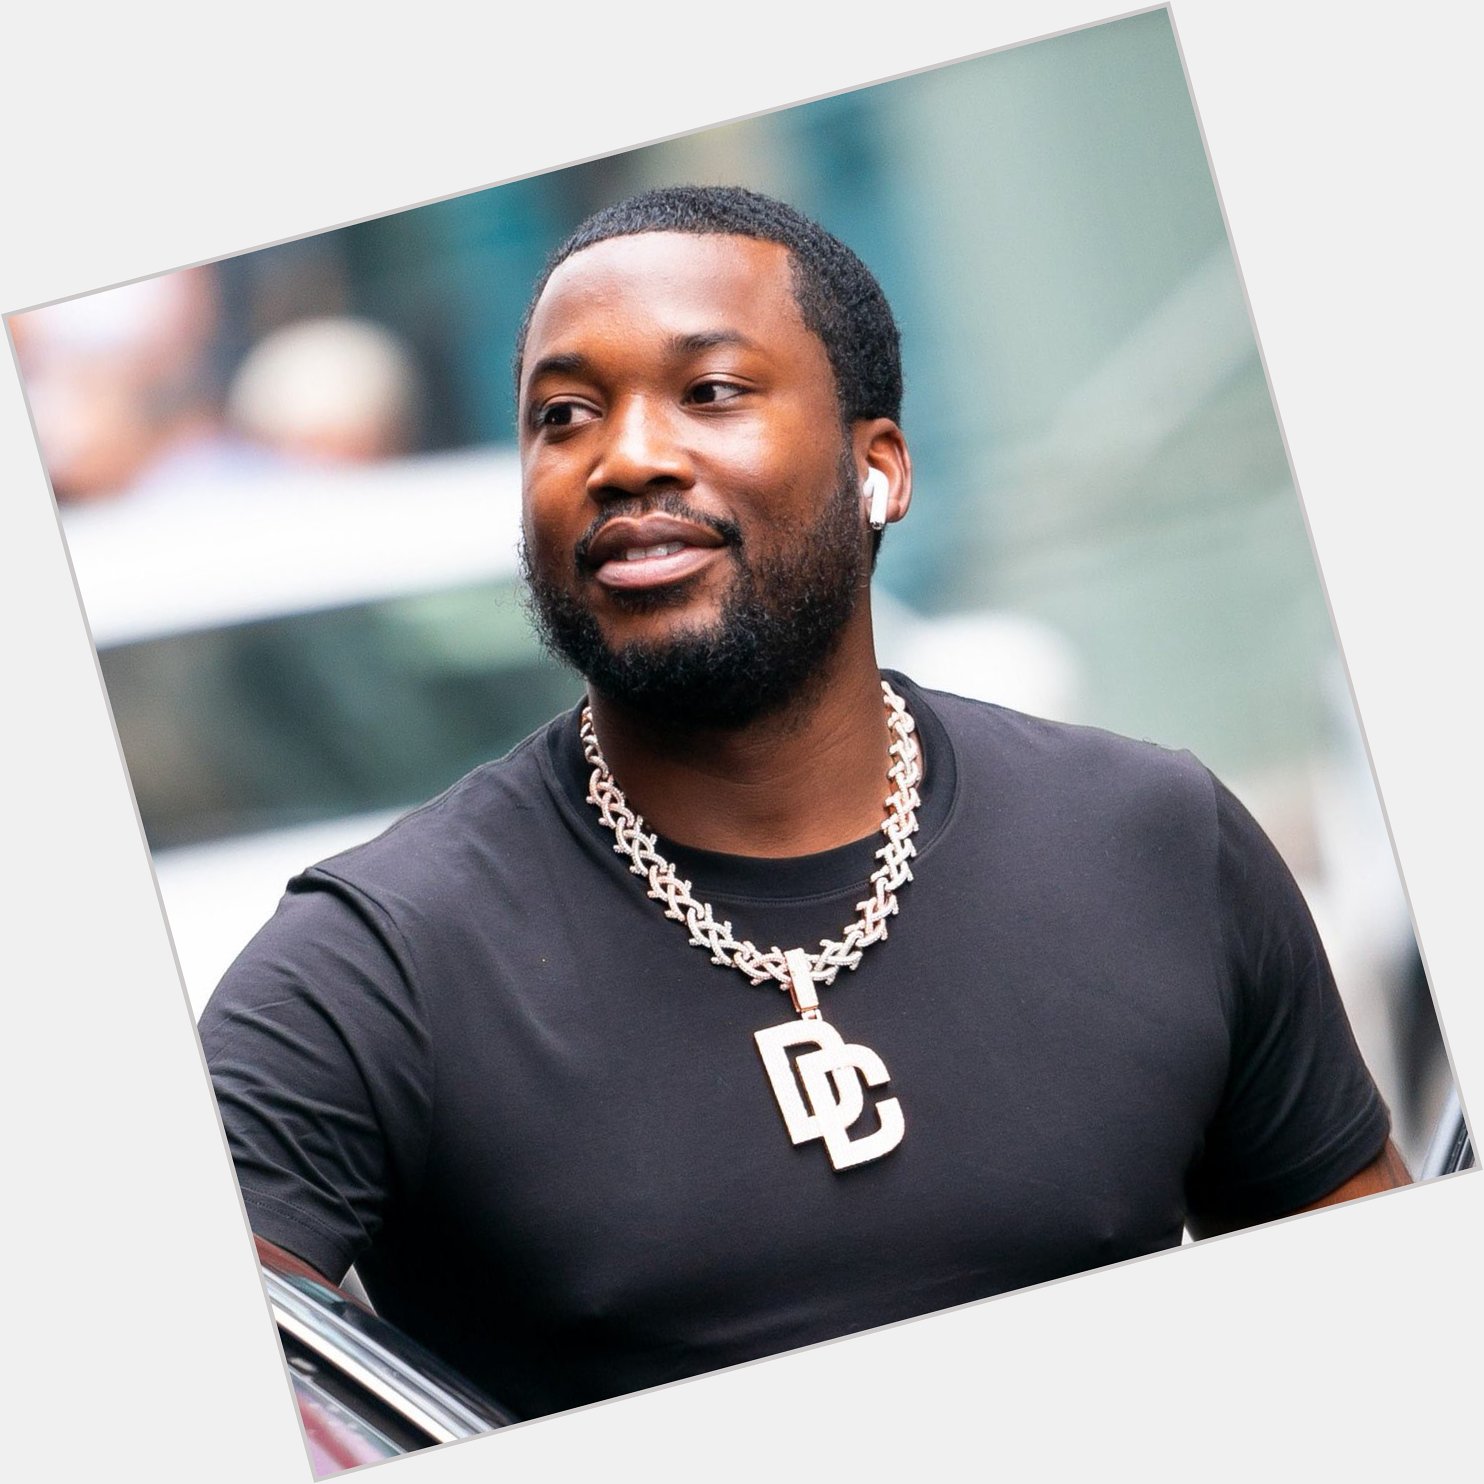 Happy Birthday to Meek Mill! He turns 35 years old today  What s your favorite Meek Mill track? 